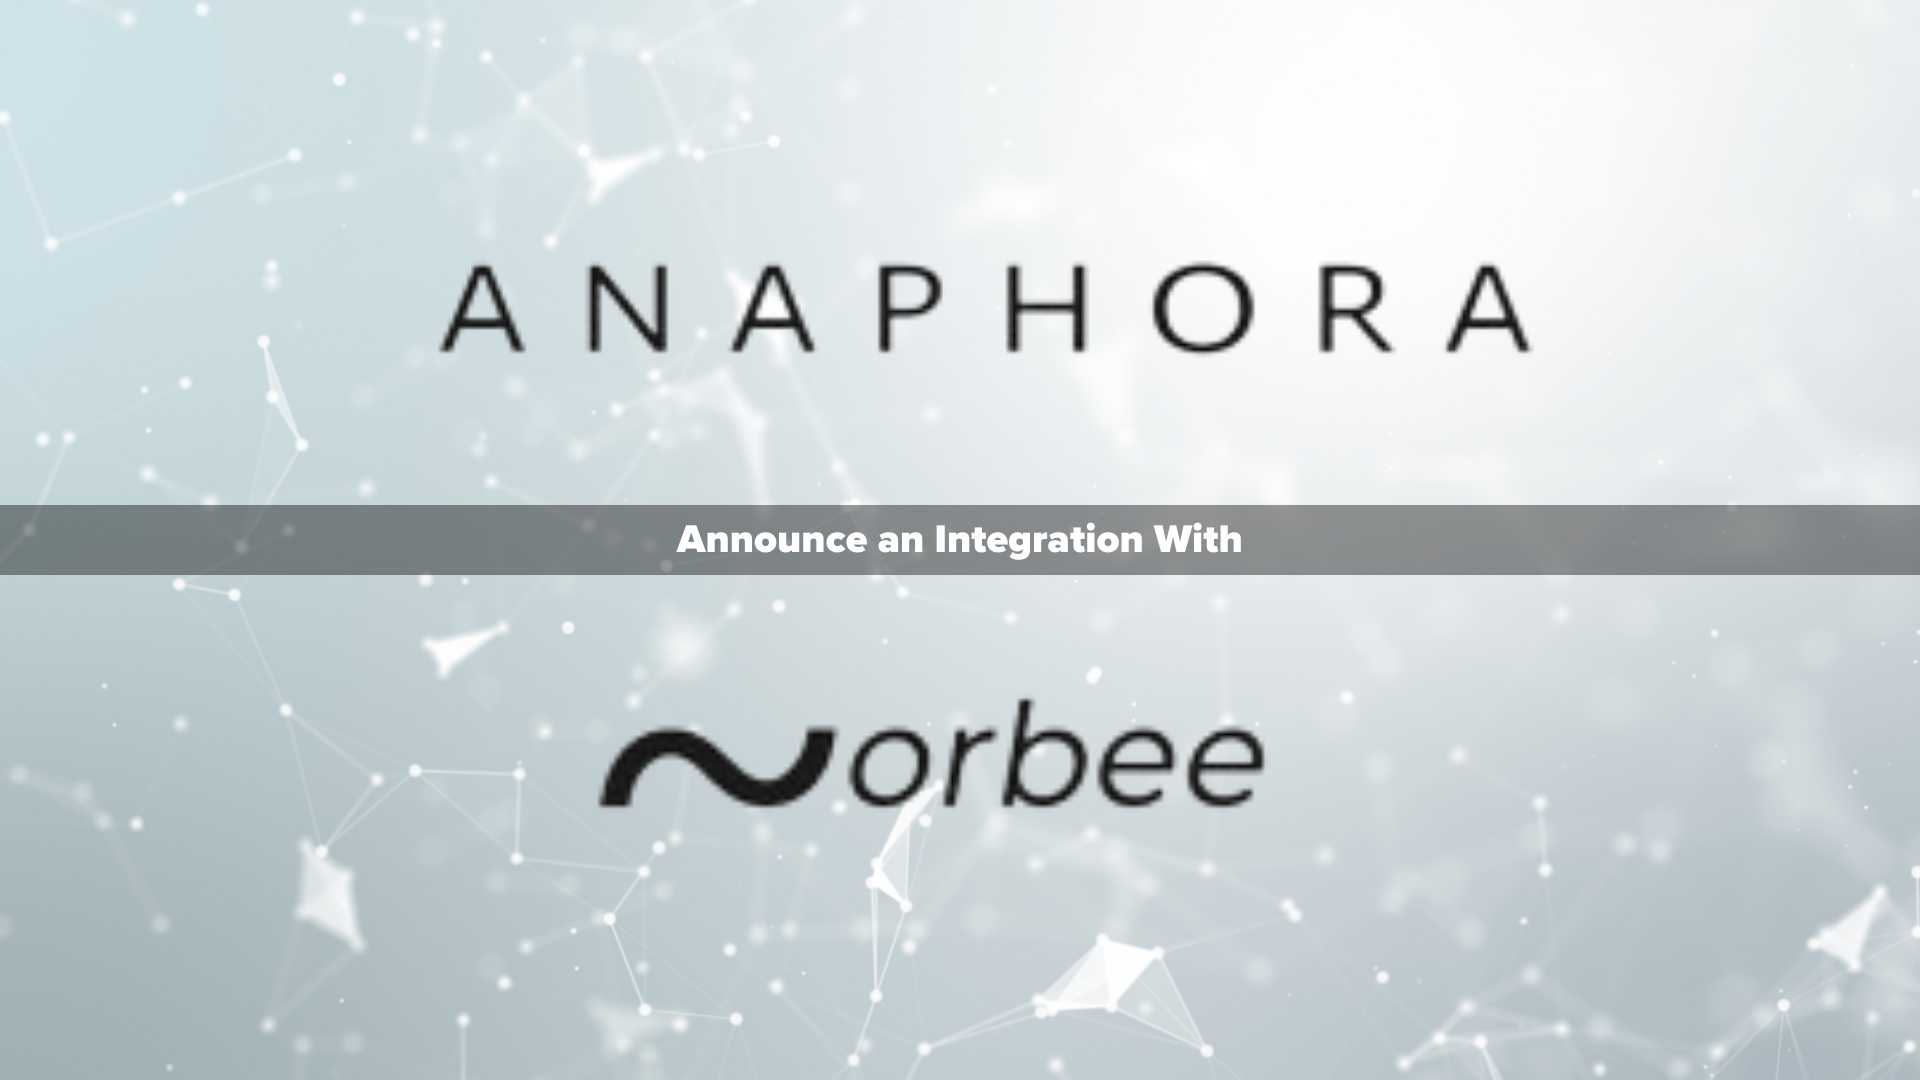 Orbee and Anaphora Integrate to Bring a New Blend of Creativity and Technology to Email Marketing